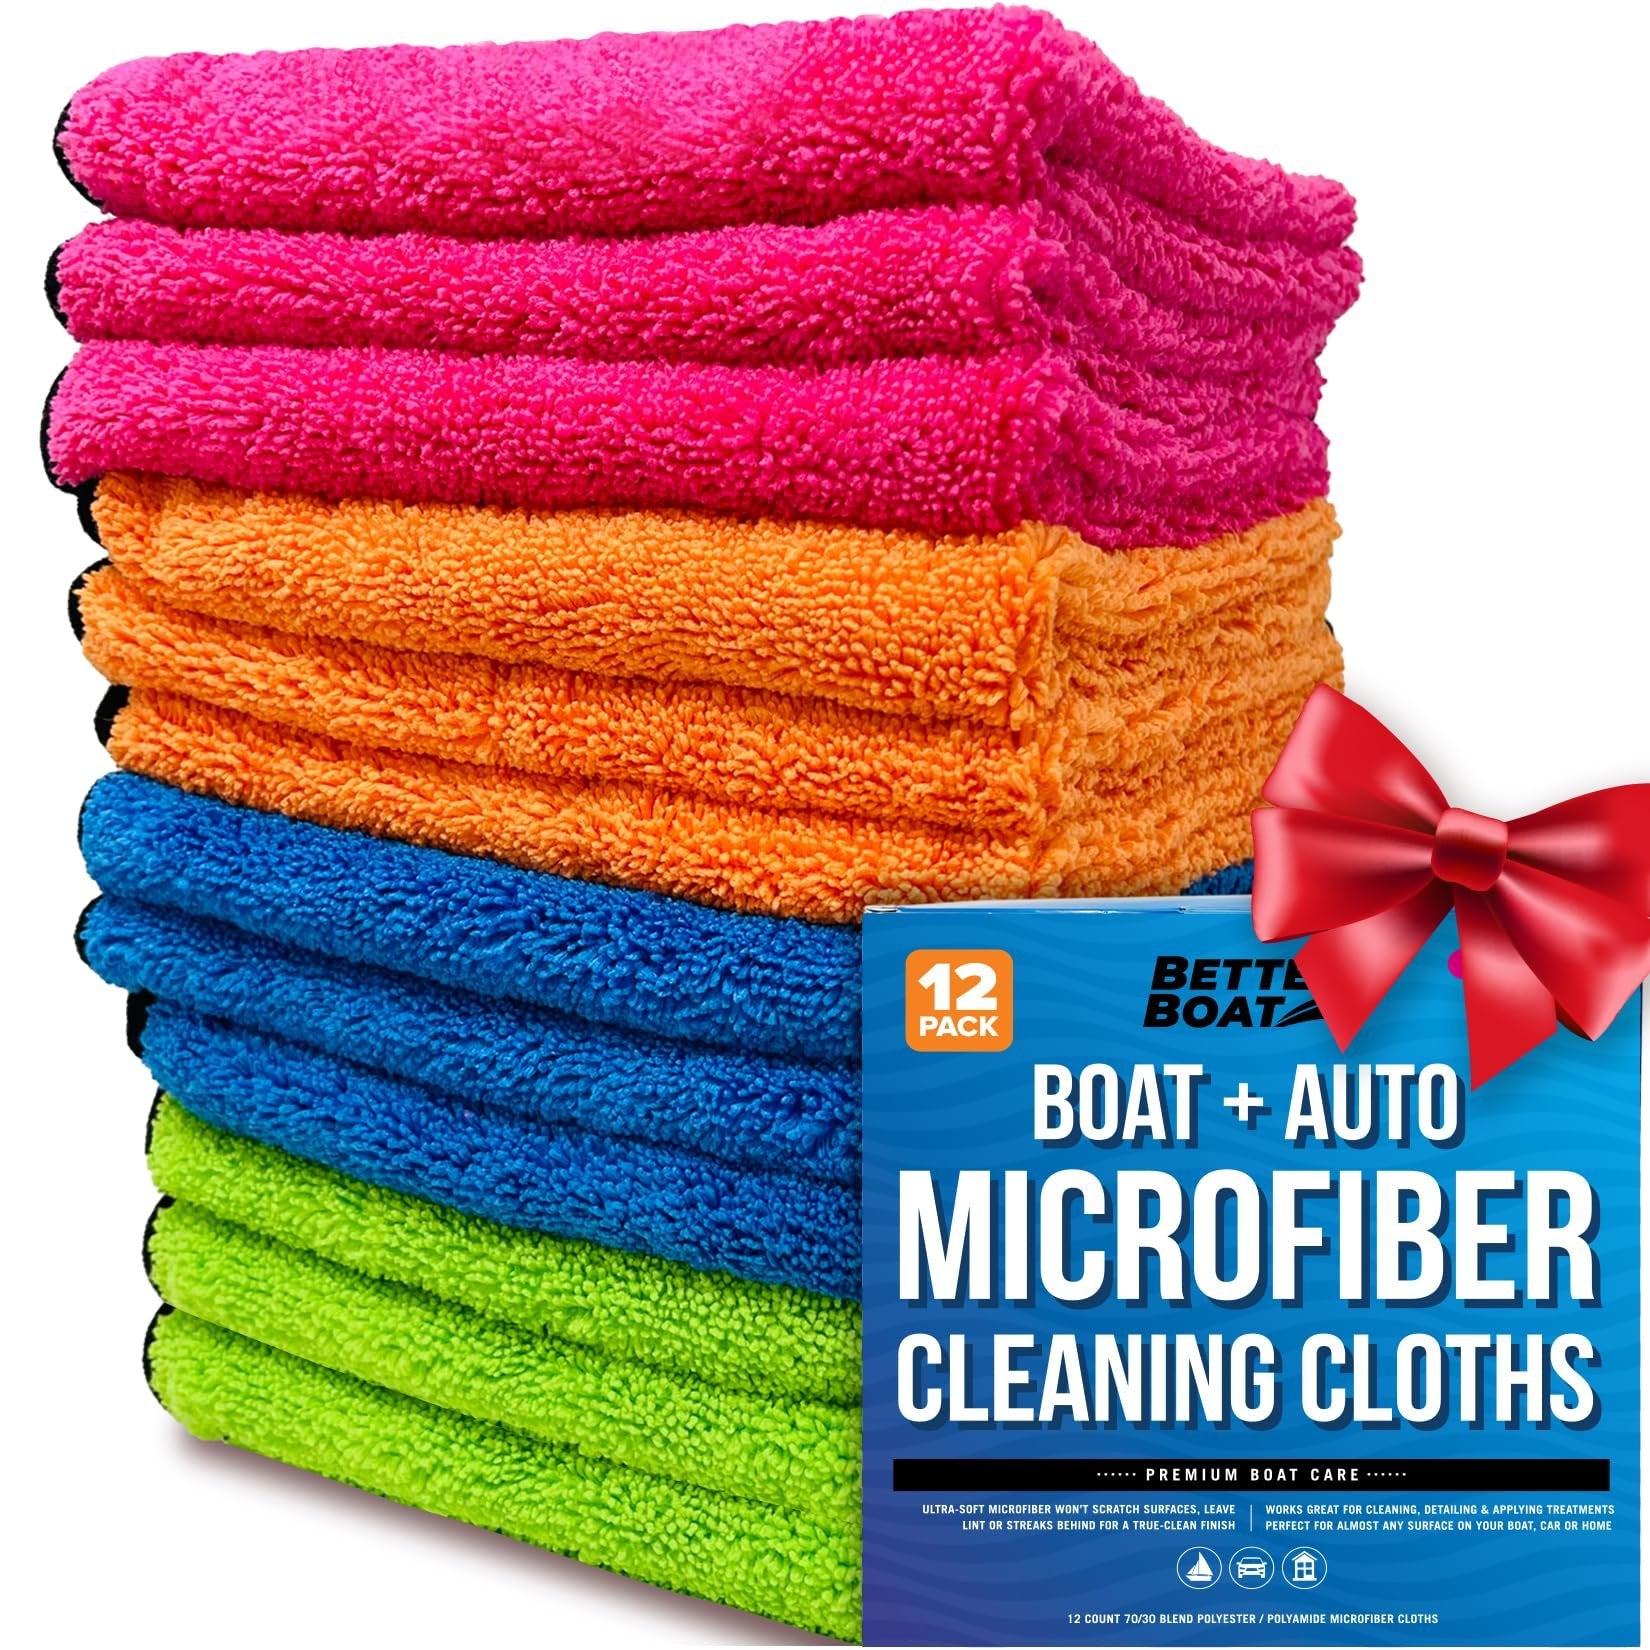 12 Pack Microfiber Cloth Kit Boat and Auto Microfiber Cleaning Cloth for Cars, Boats, House Lint Free Microfiber Cleaning Cloth Microfiber Towel Bulk Set Thick Large Cloths